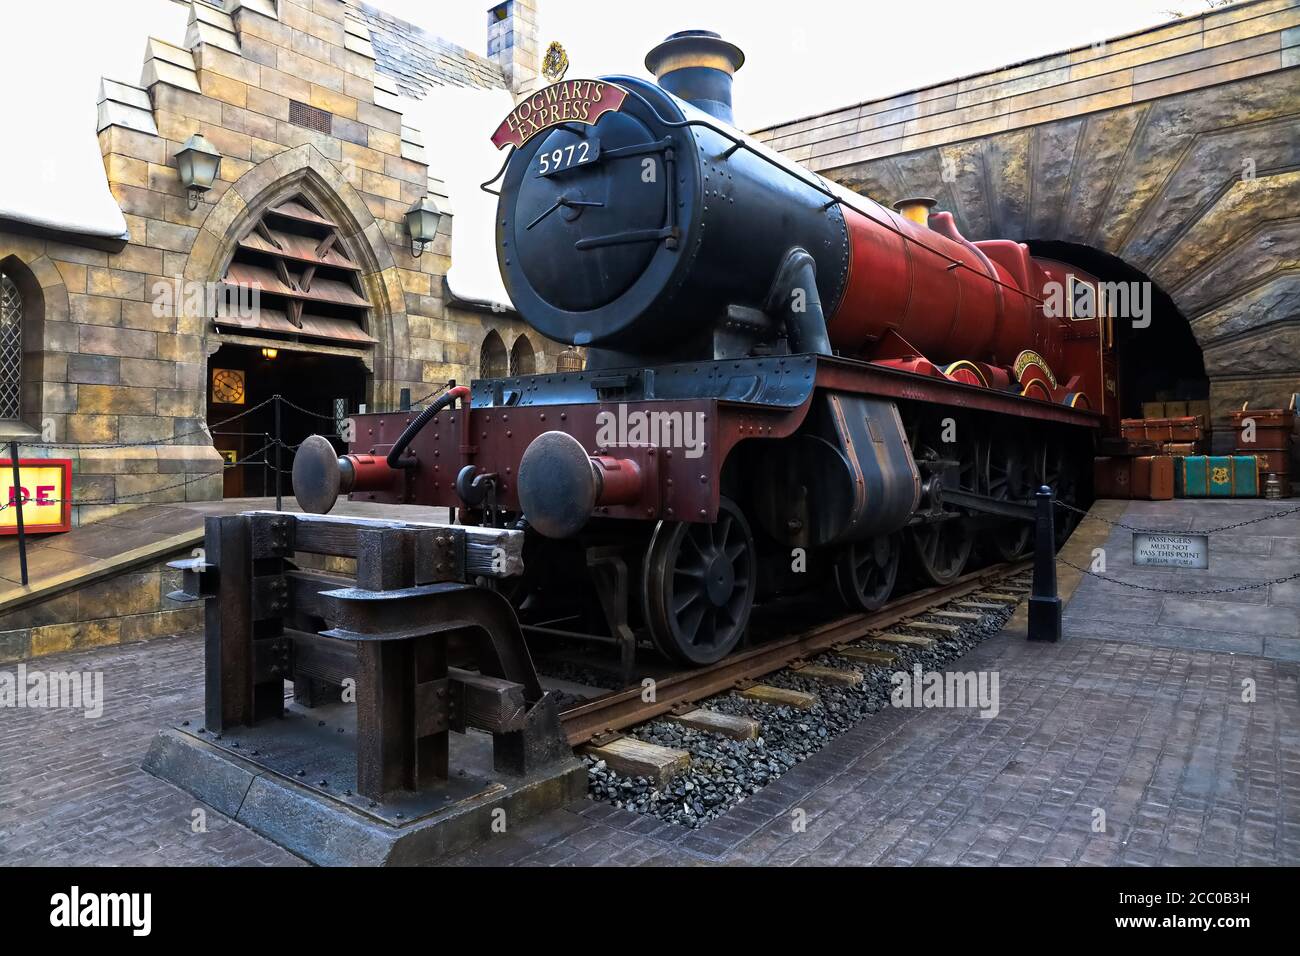 The hogwarts express train at the Wizarding World of Harry Potter in Universal Studios Japan, a theme park in Osaka, Japan Stock Photo